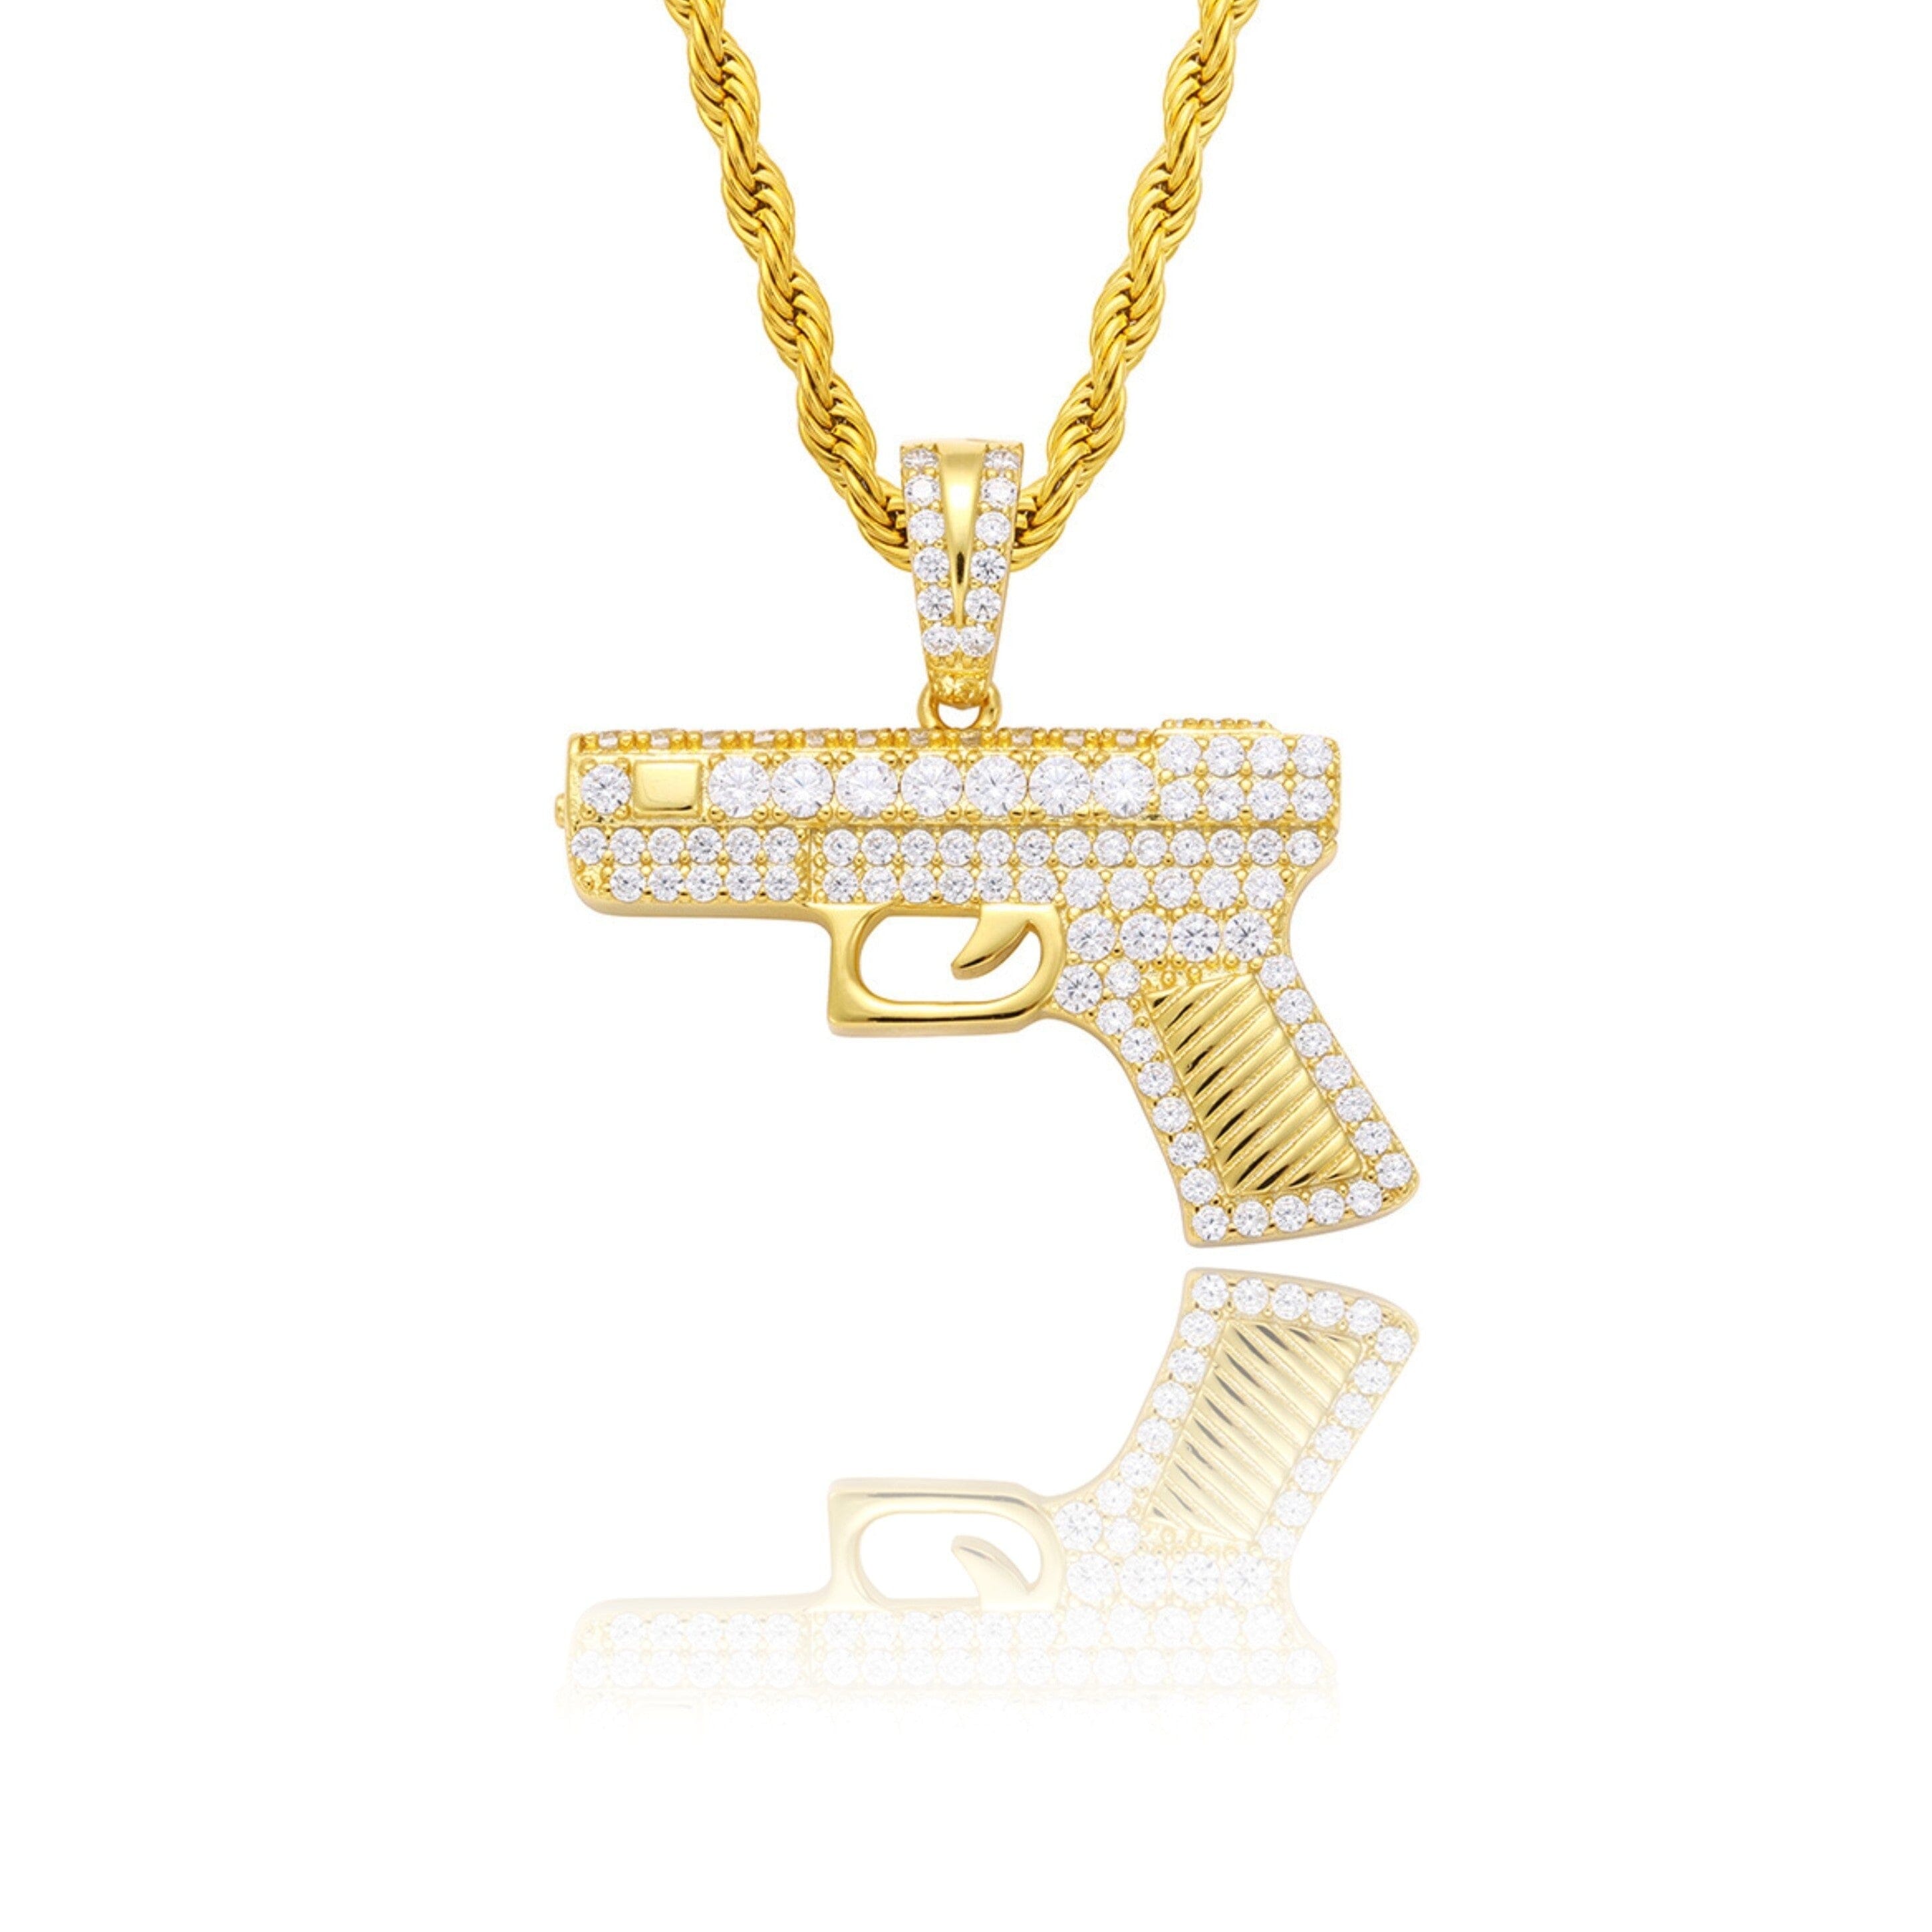 YOUNG. WILD. FREE. - Glcok Handgun Pendant - 1.5inch Charms & Pendants Brass with CZ Stone Free Rope Chain Yellow Gold